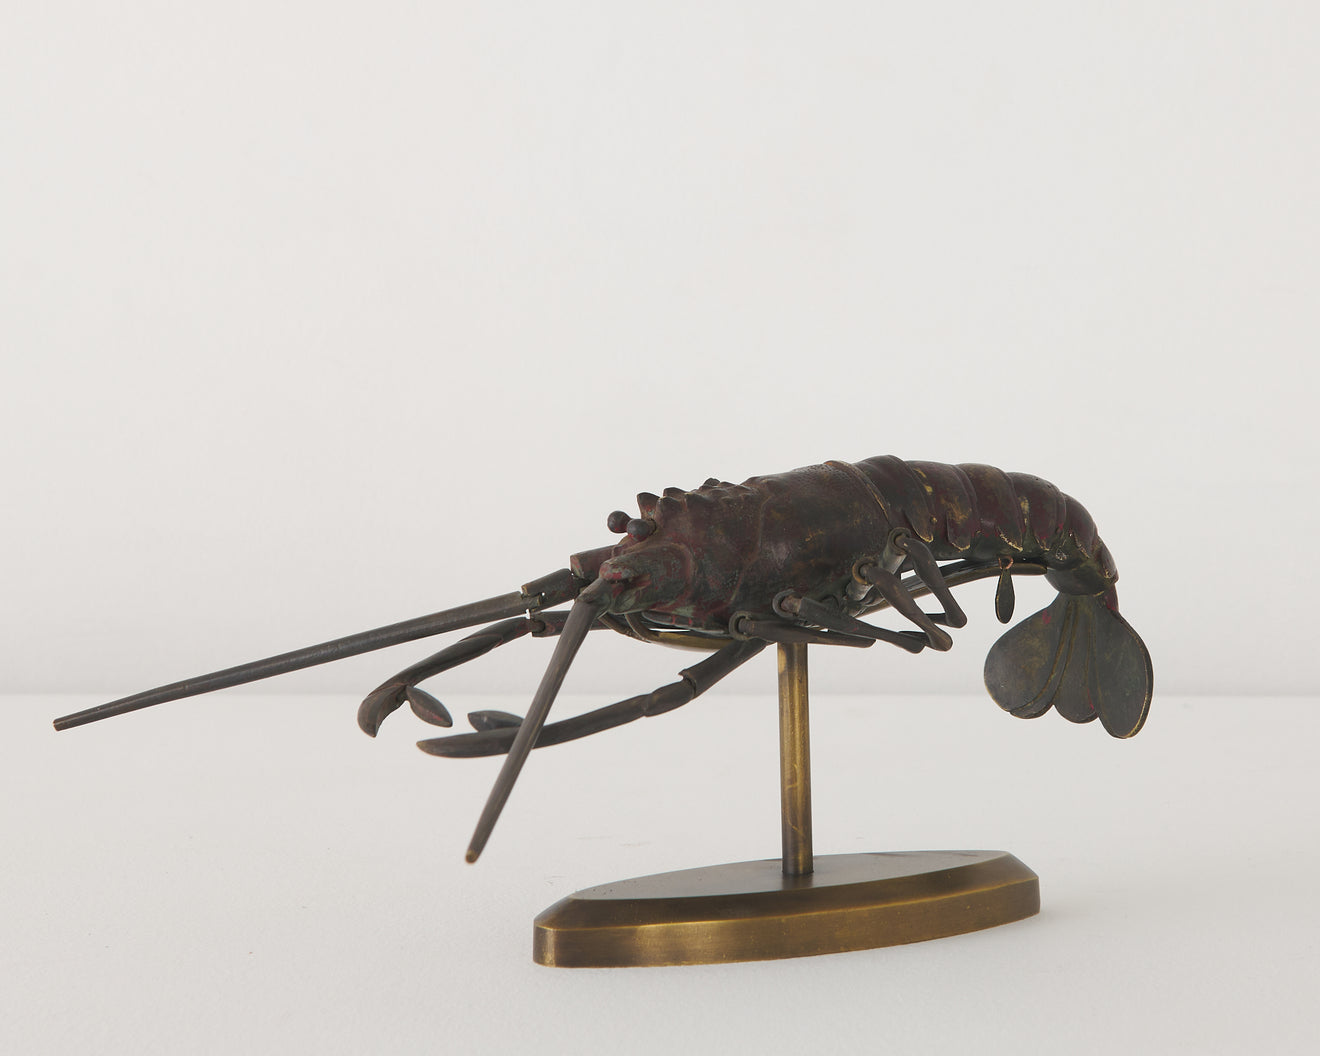 JAPANESE BRONZE ARTICULATED LOBSTER